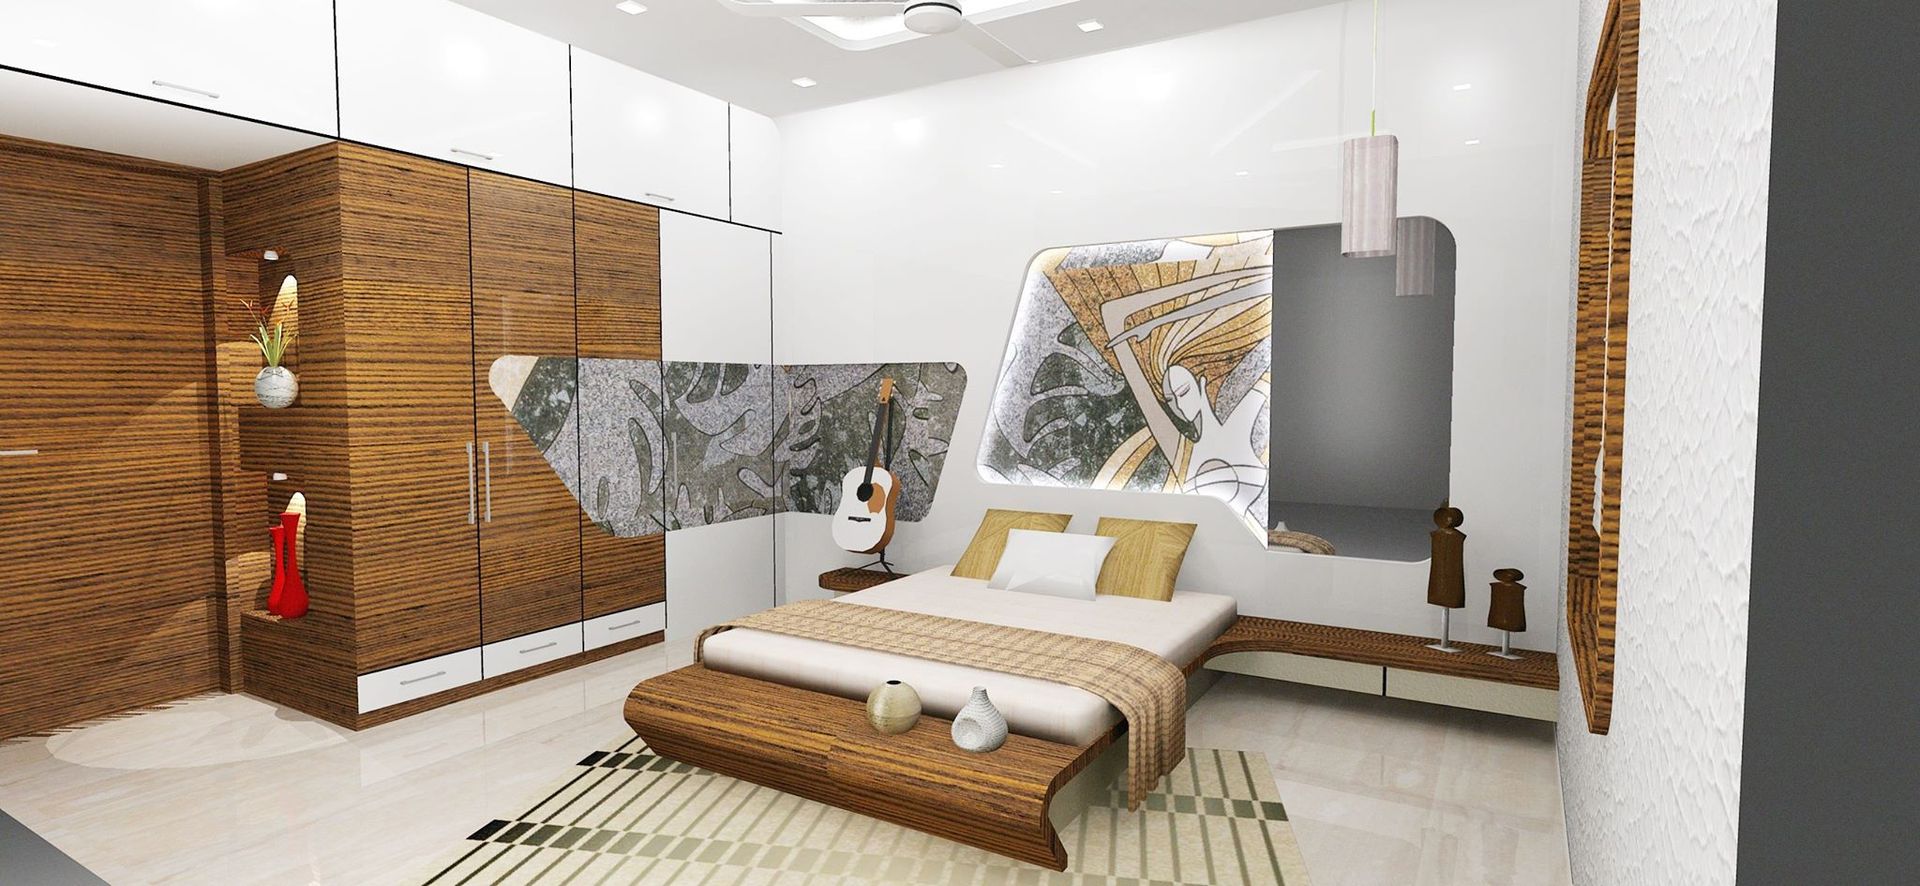 Bedroom Designs, Archsmith project consultant Archsmith project consultant Moderne slaapkamers